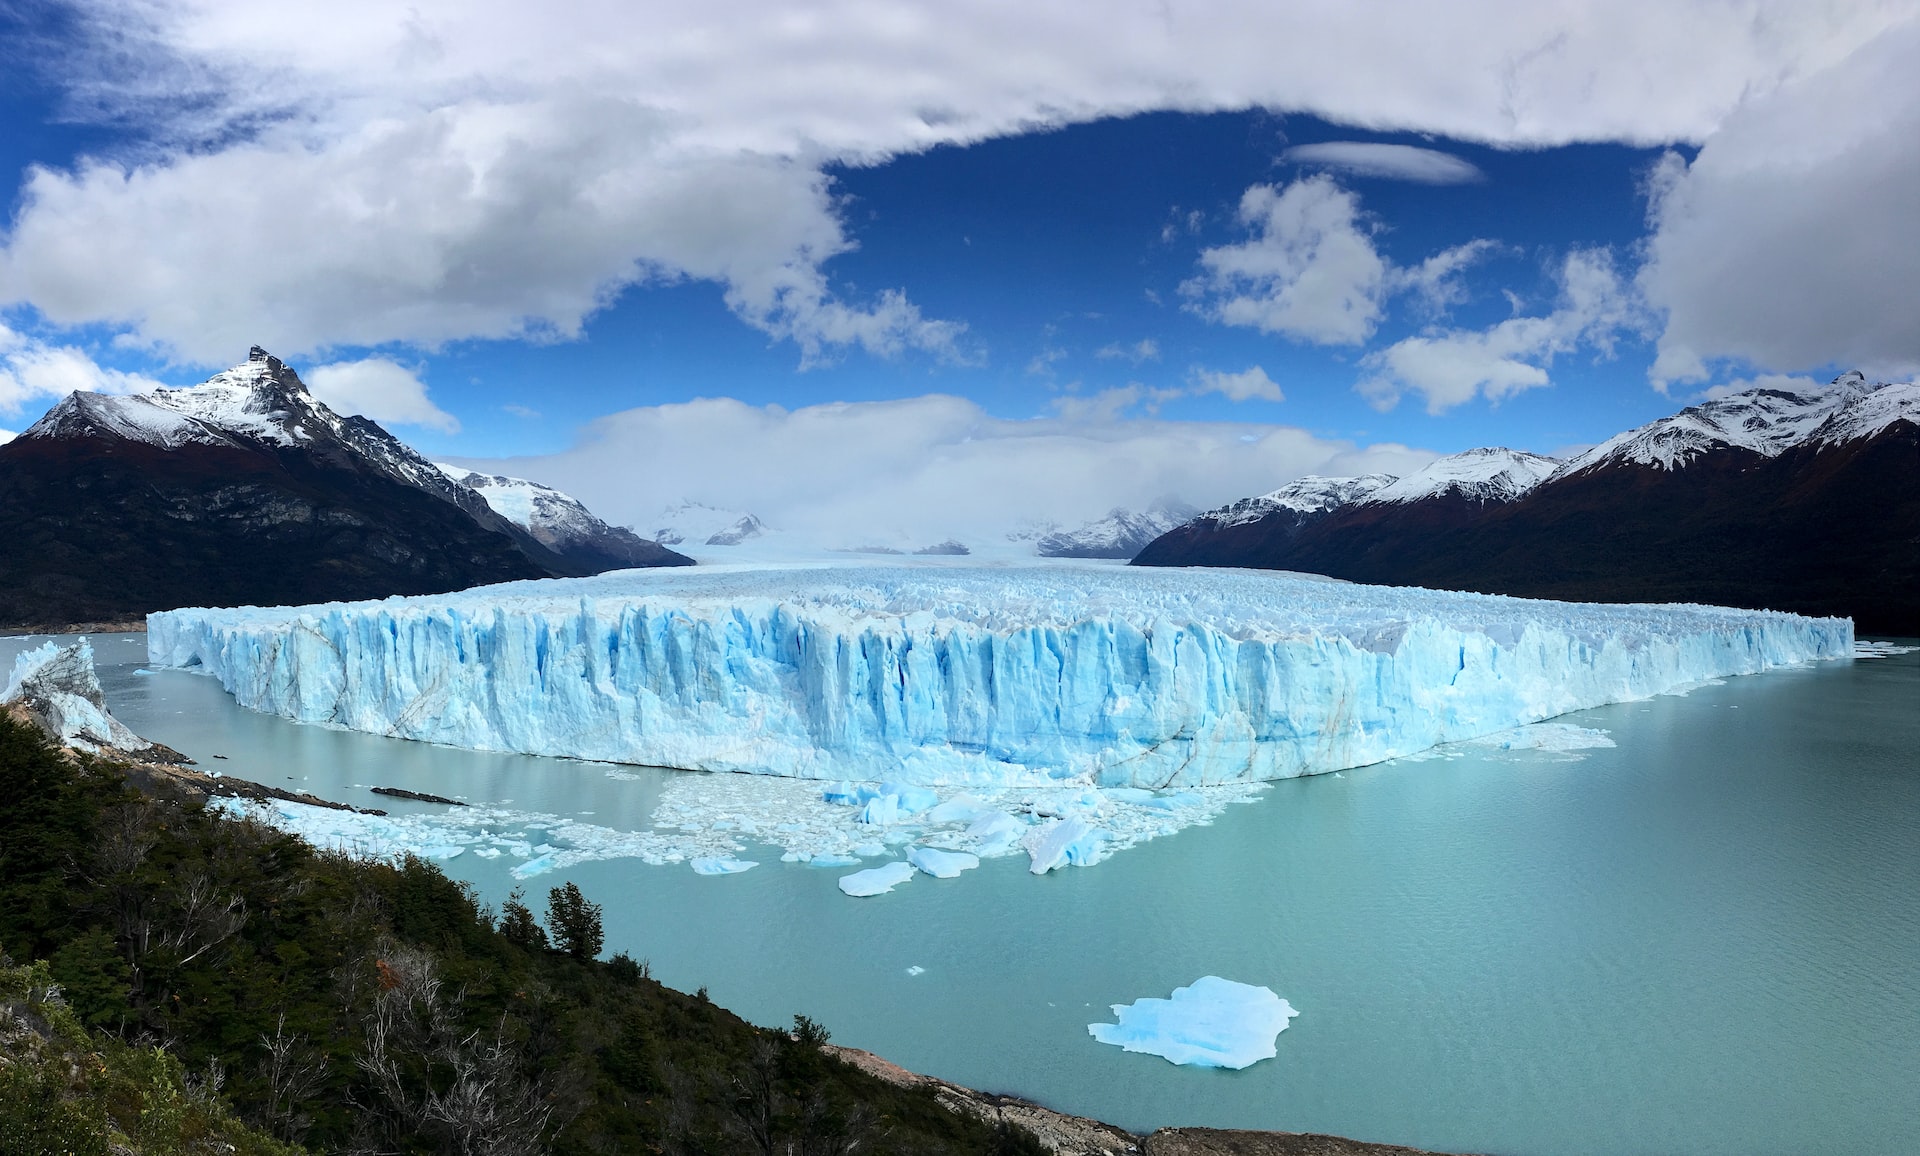 Glaciers - Magnificent, Massive, Melting, A Mounting Crisis